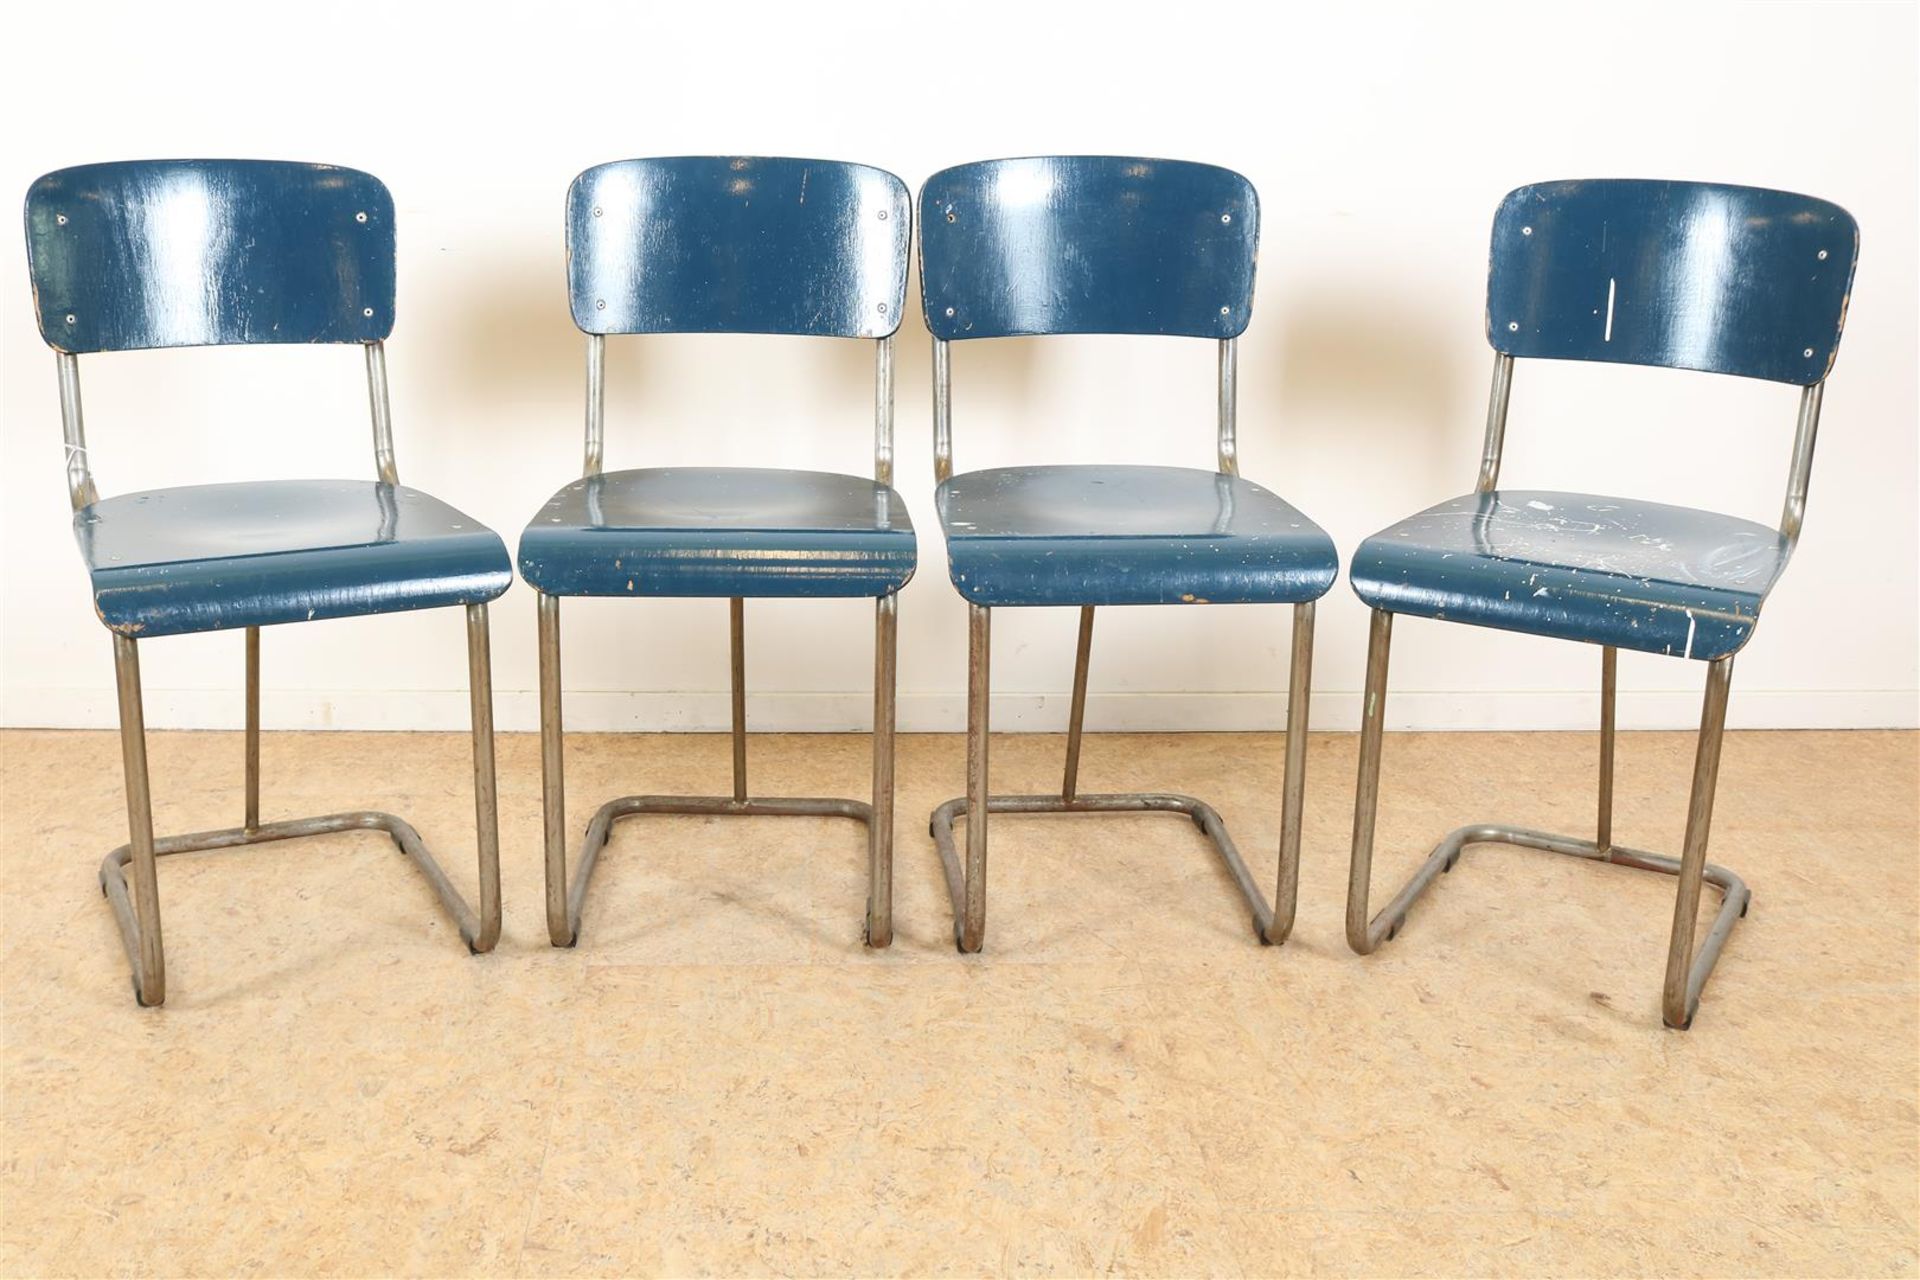 Series of 4 chrome tube Gispen chairs with blue wooden seat and backrest, model 107, produced